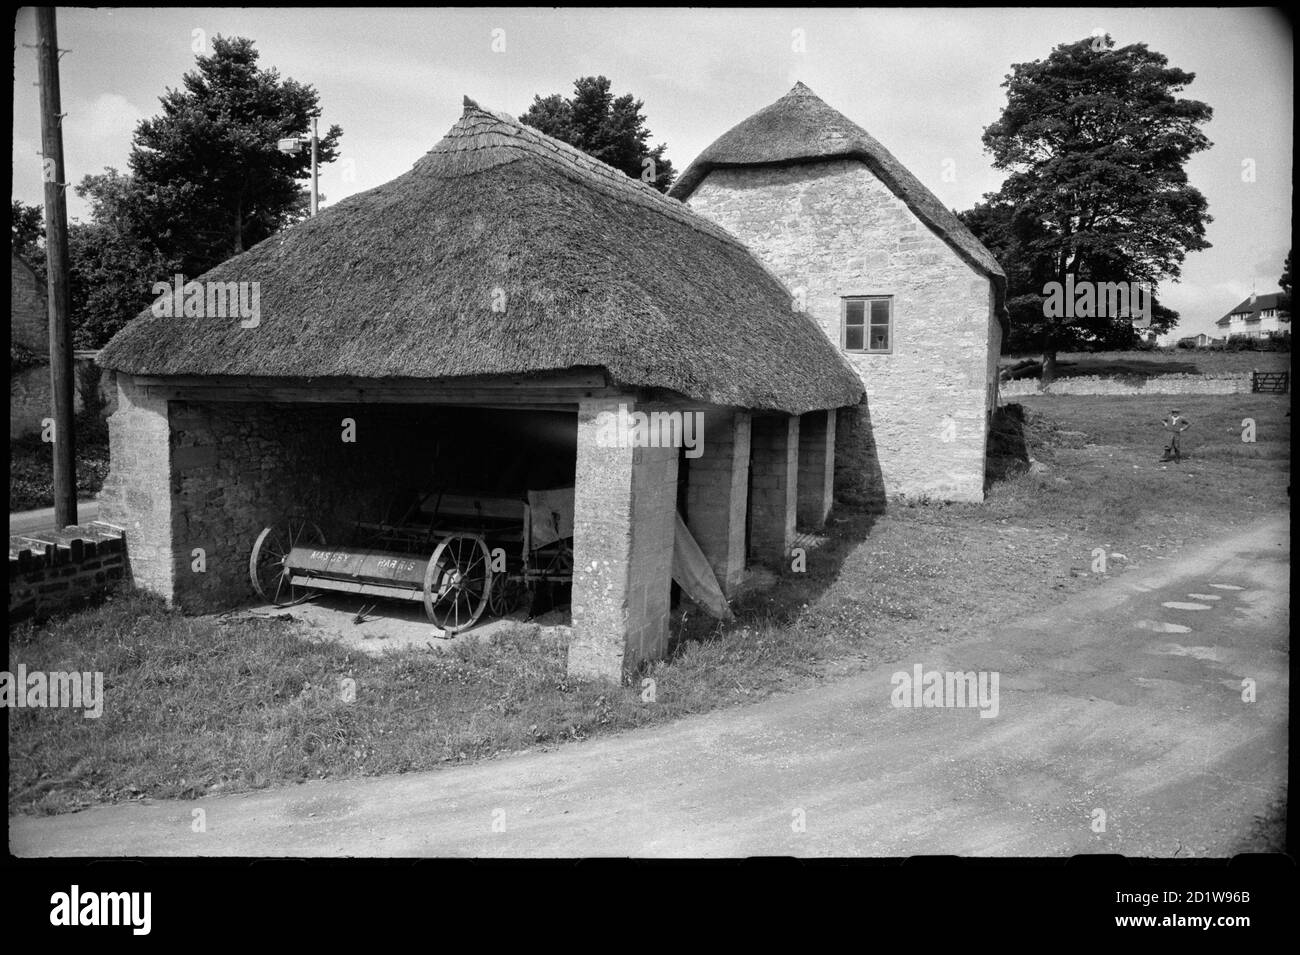 Exterior view of a single-storey thatched barn attached to a stone building with thatched roof and housing a wooden vehicle, likely a cart or trap, set within a low-walled yard with a man stood nearby and a large house in the background. Stock Photo